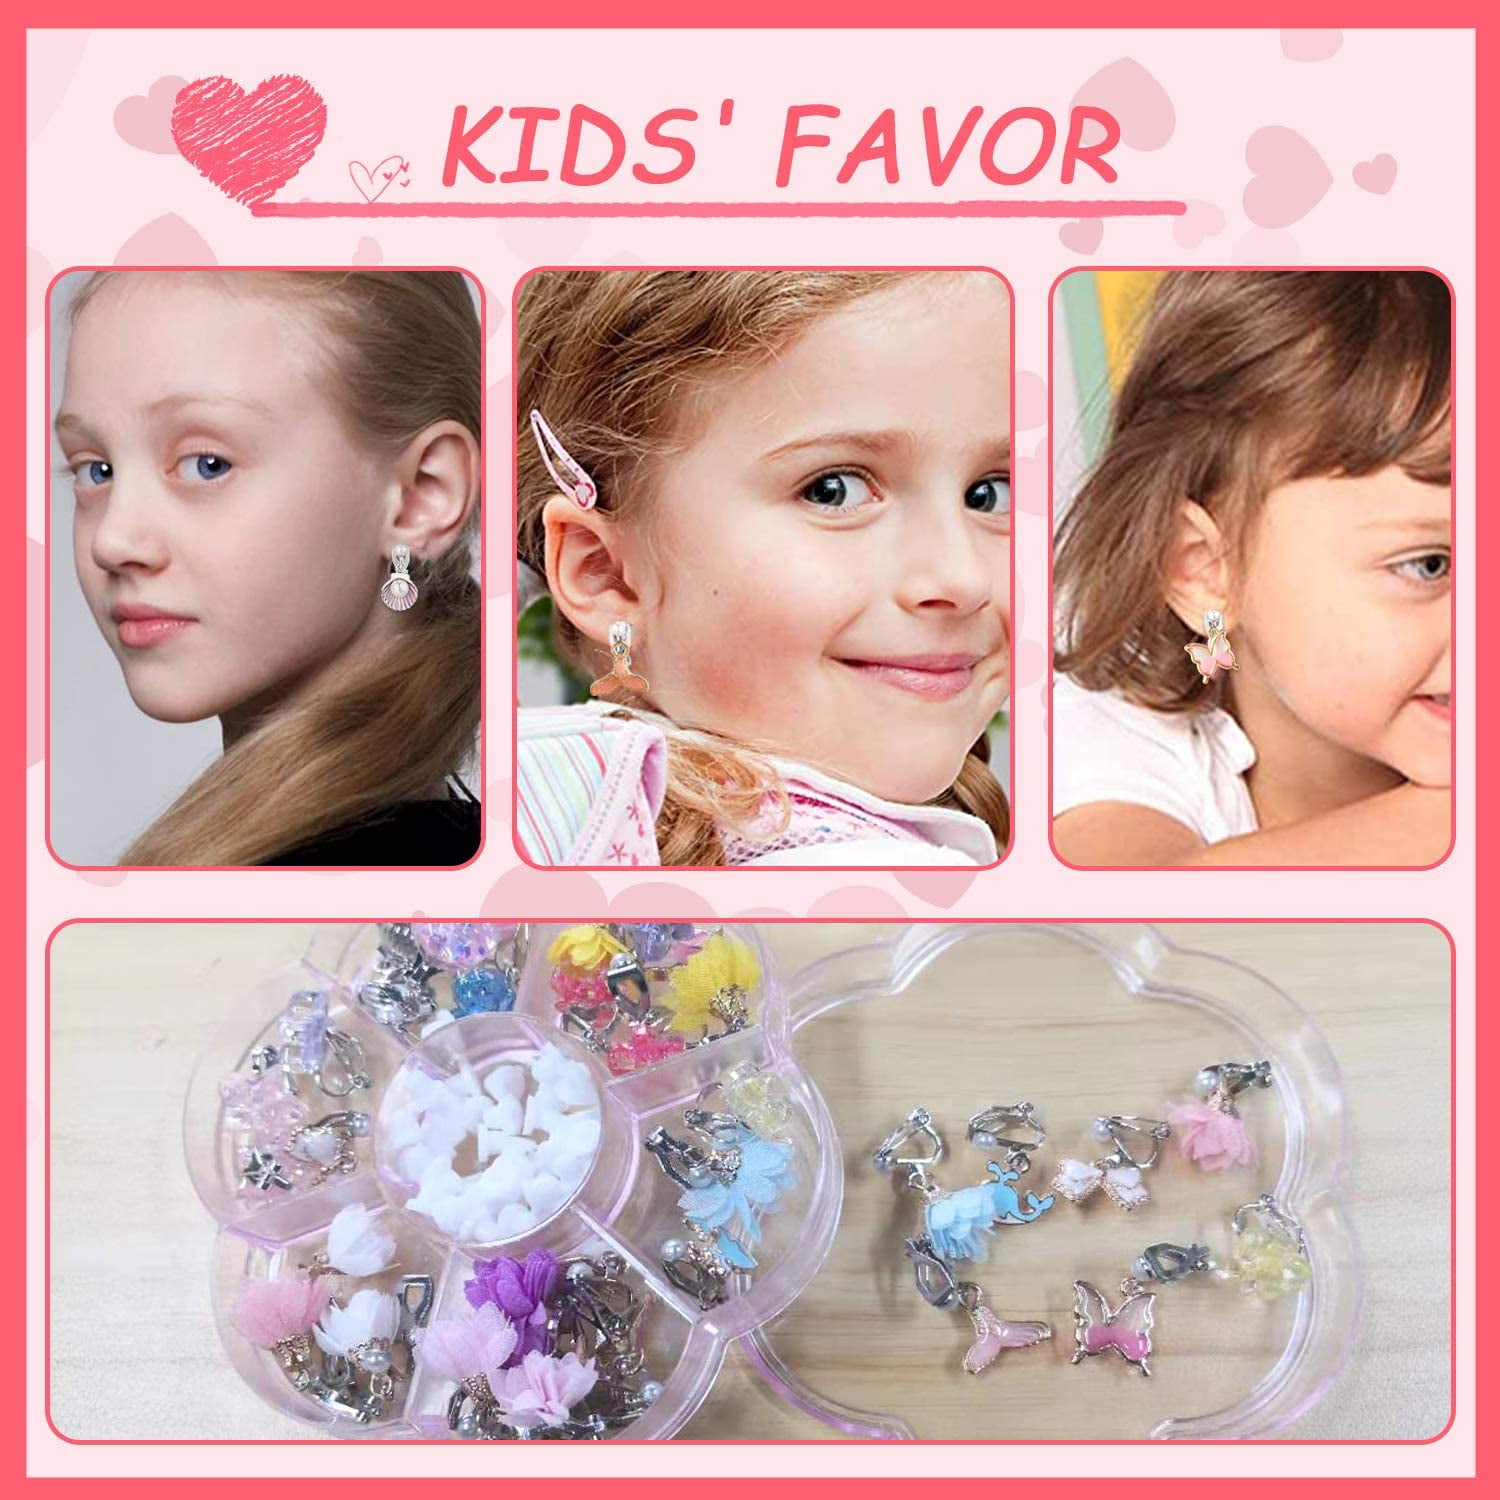 PinkSheep Clip On Earrings for Little Girls Kids Jewelry 12 Pairs Gift for  4/5/6/7/9/10 Years Old Mermaid Flower Earring